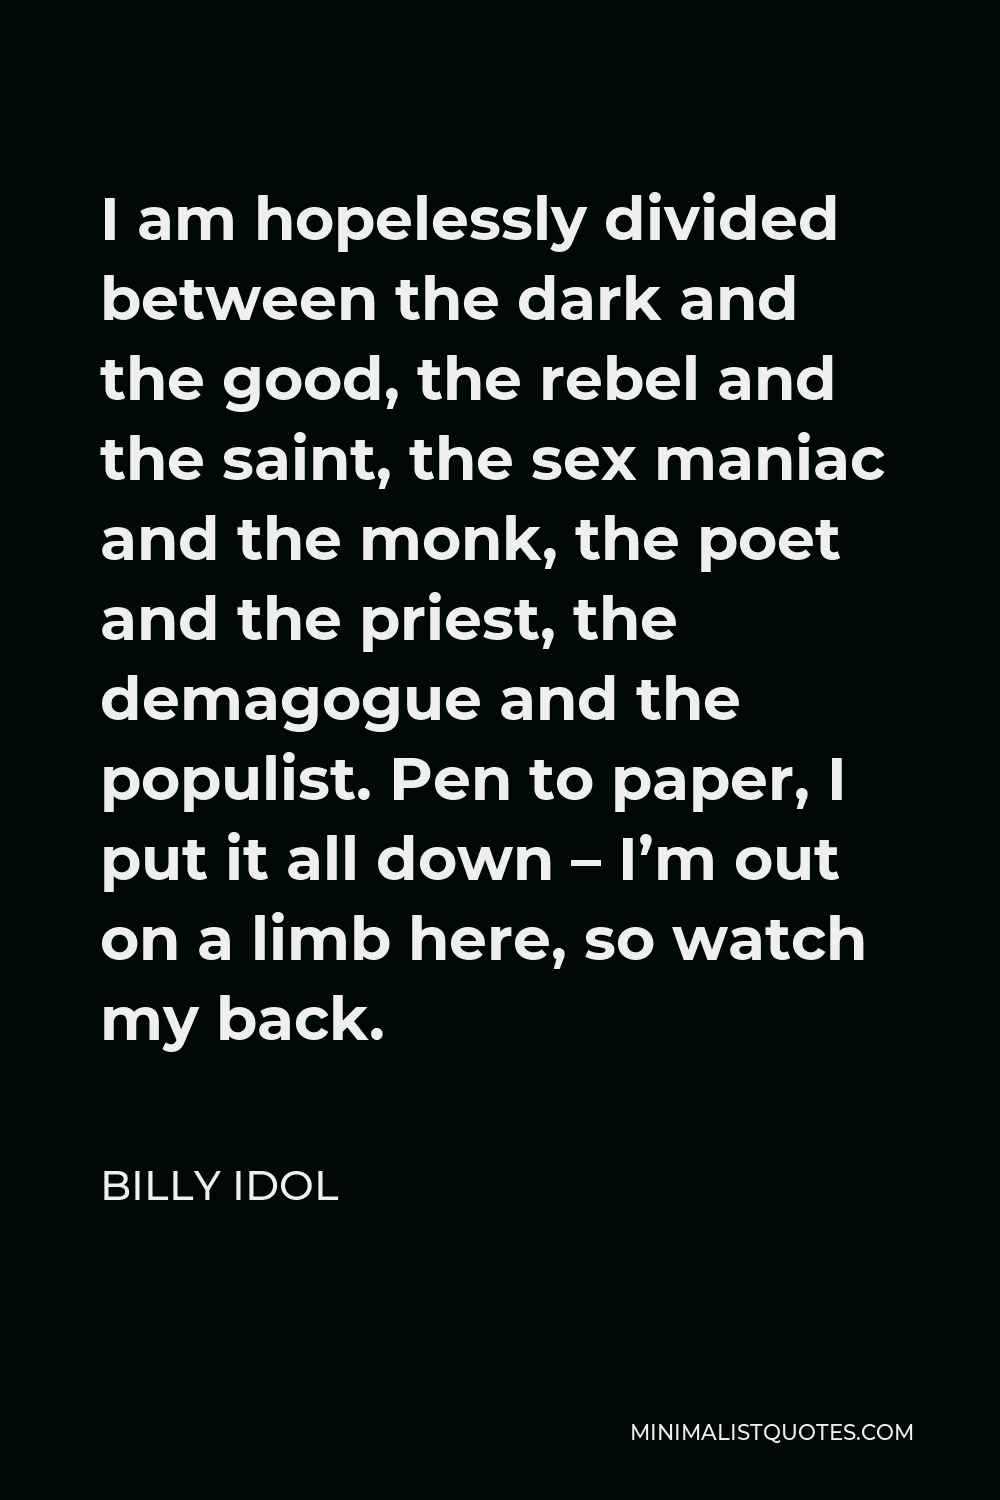 Billy Idol Quote - I am hopelessly divided between the dark and the good, the rebel and the saint, the sex maniac and the monk, the poet and the priest, the demagogue and the populist. Pen to paper, I put it all down – I’m out on a limb here, so watch my back.